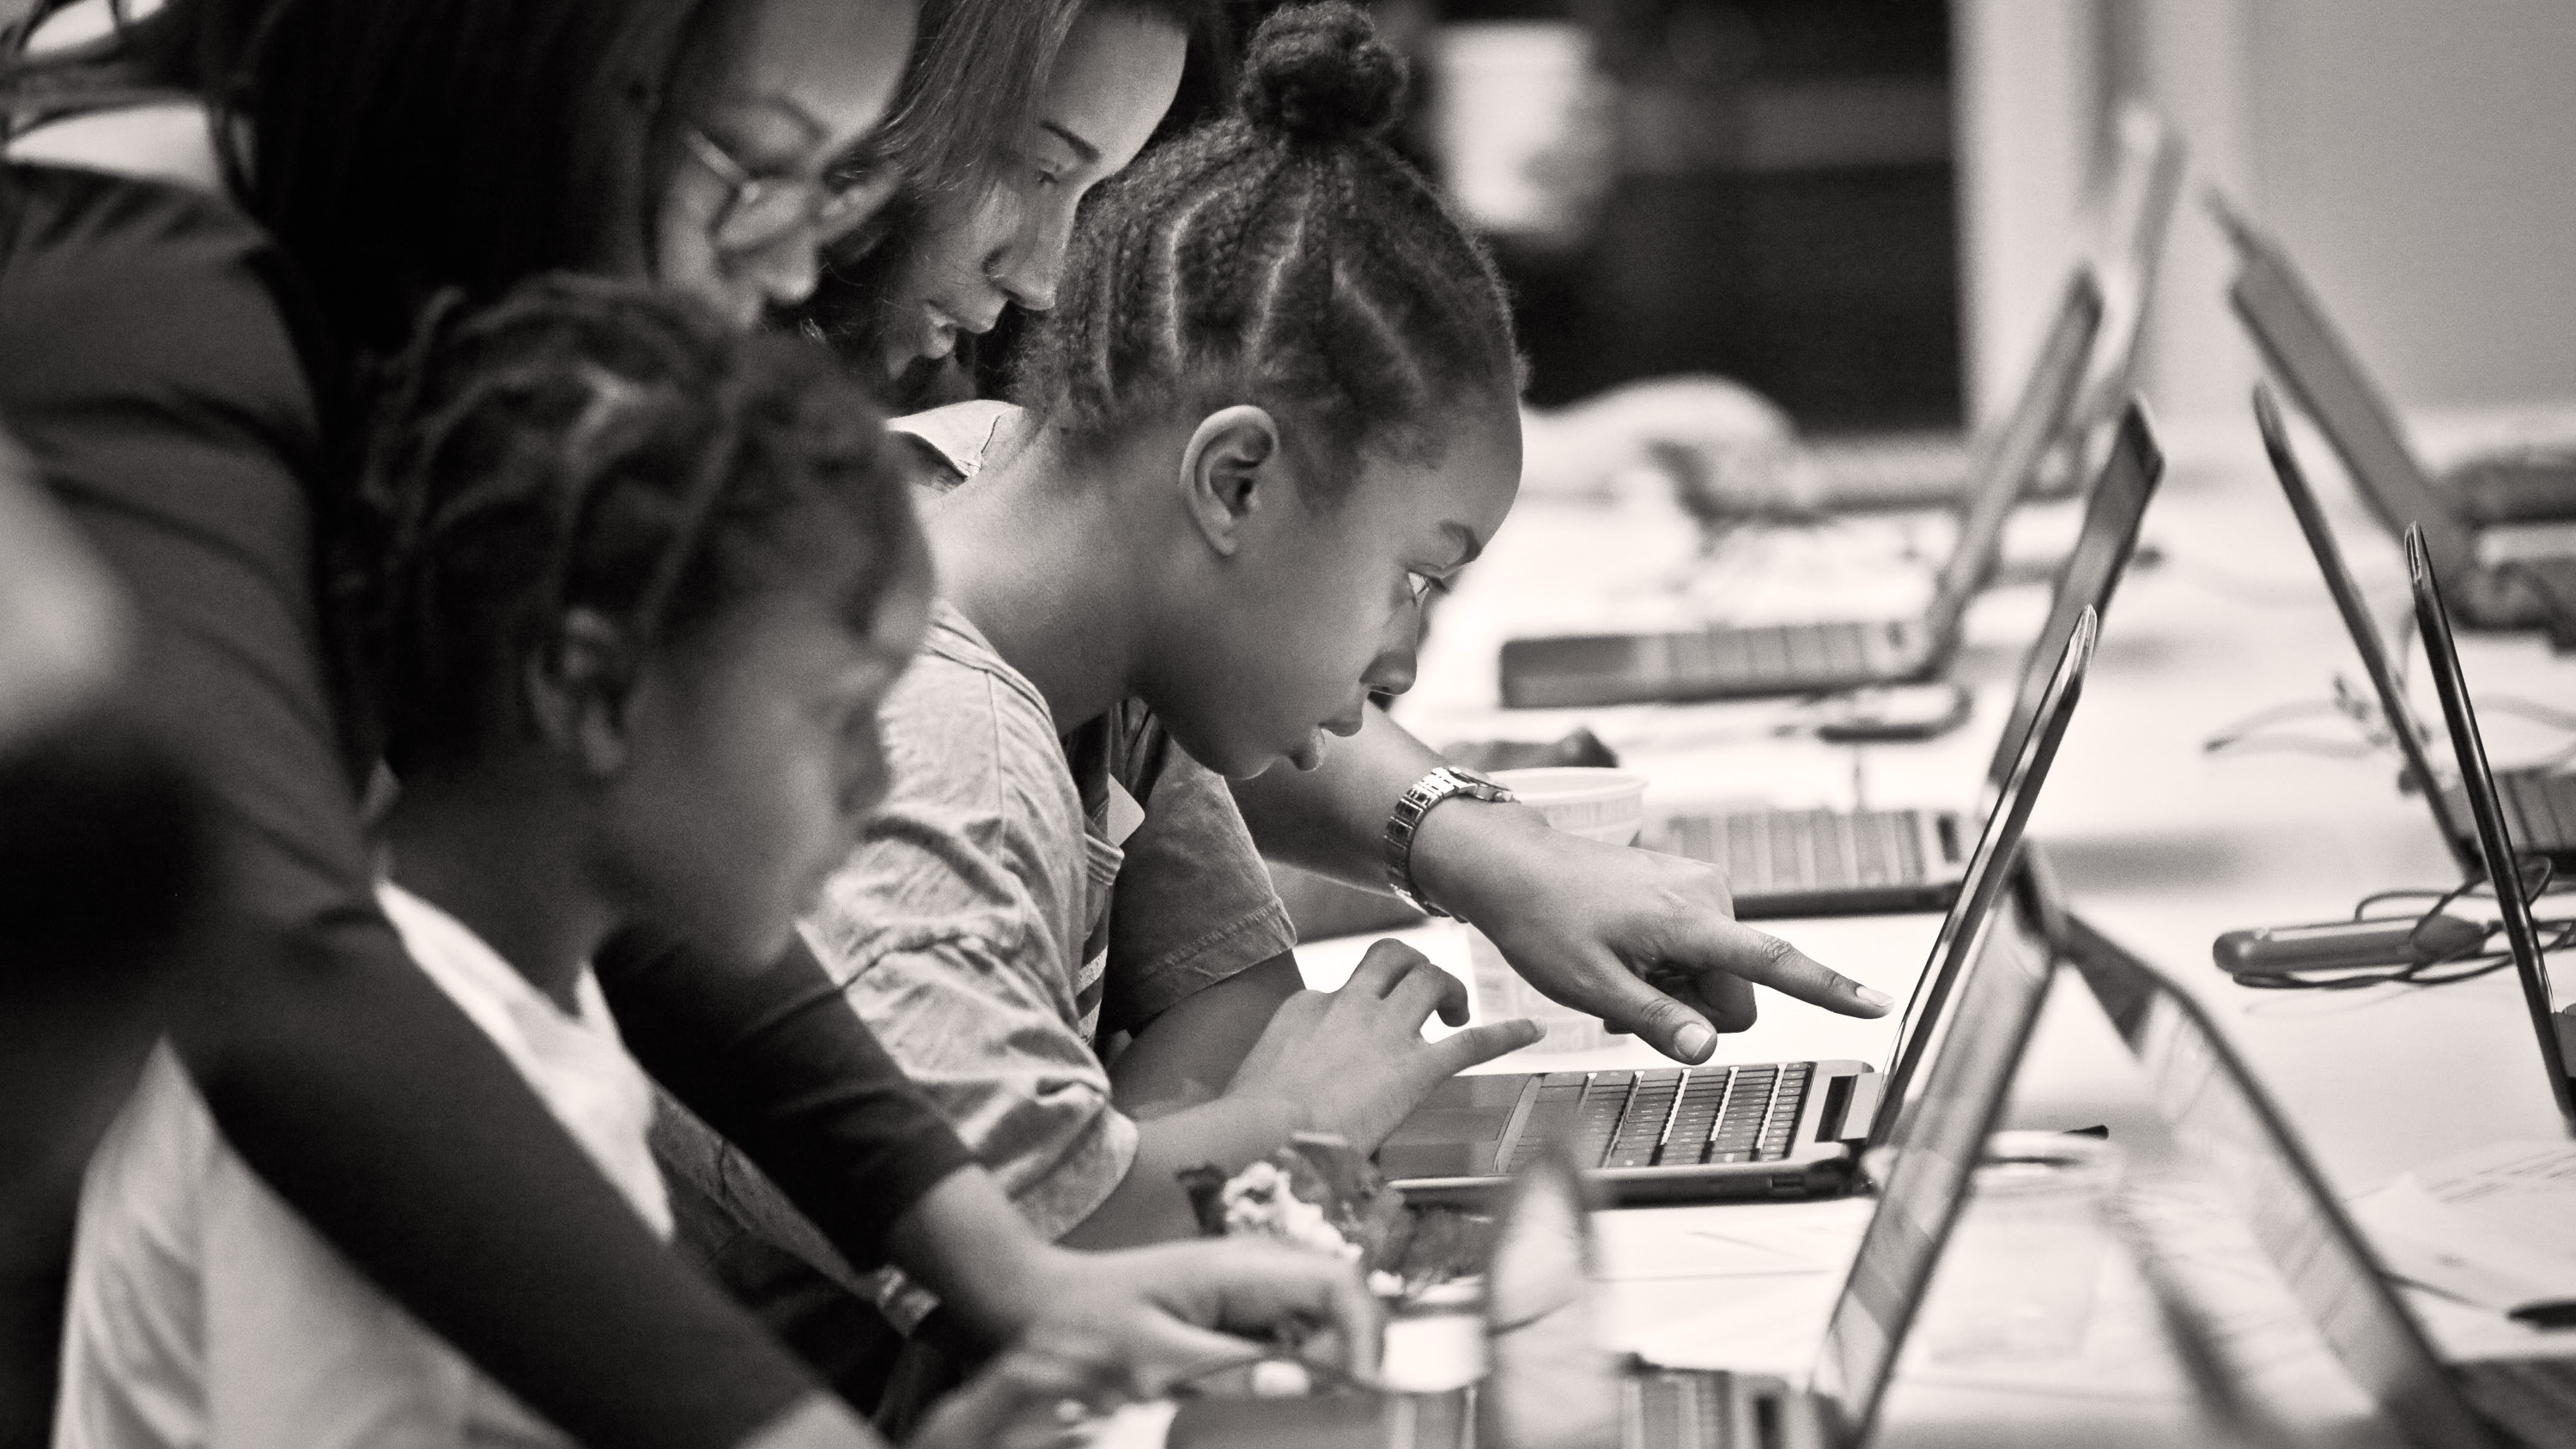 Women lean over to help young girls working together on their laptops at a long table